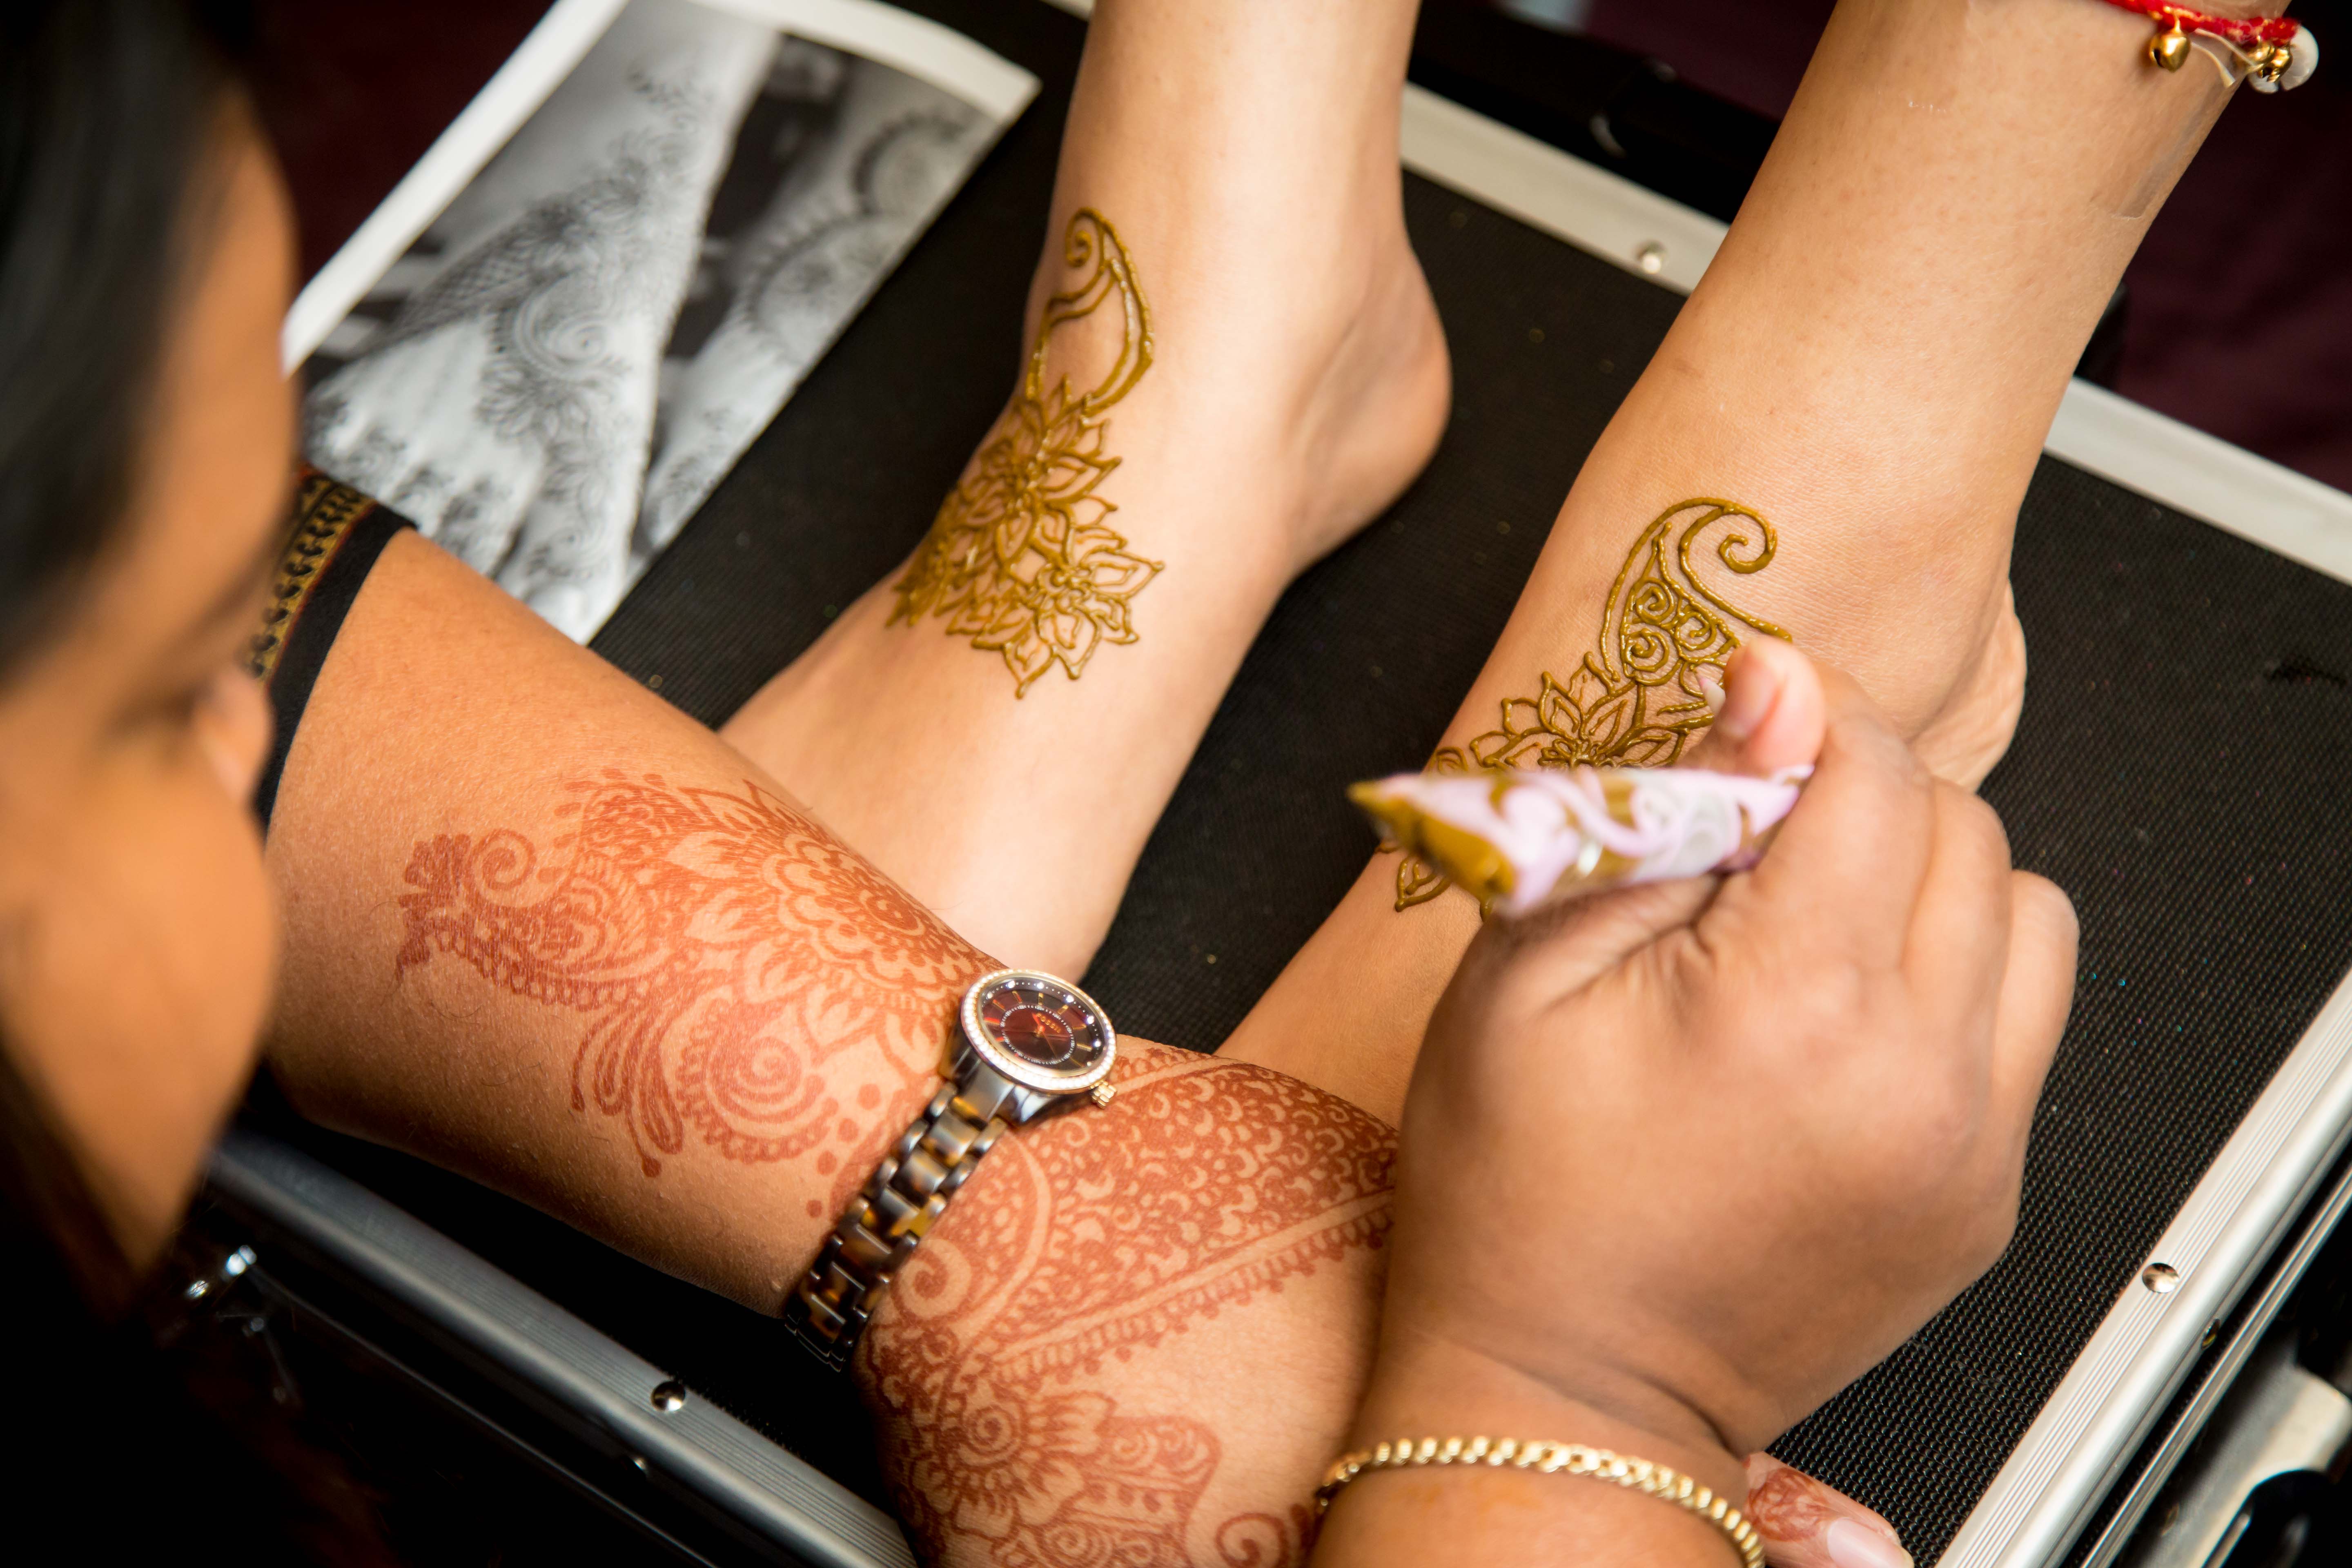 Learn about the different henna tattoo meanings – Mihenna